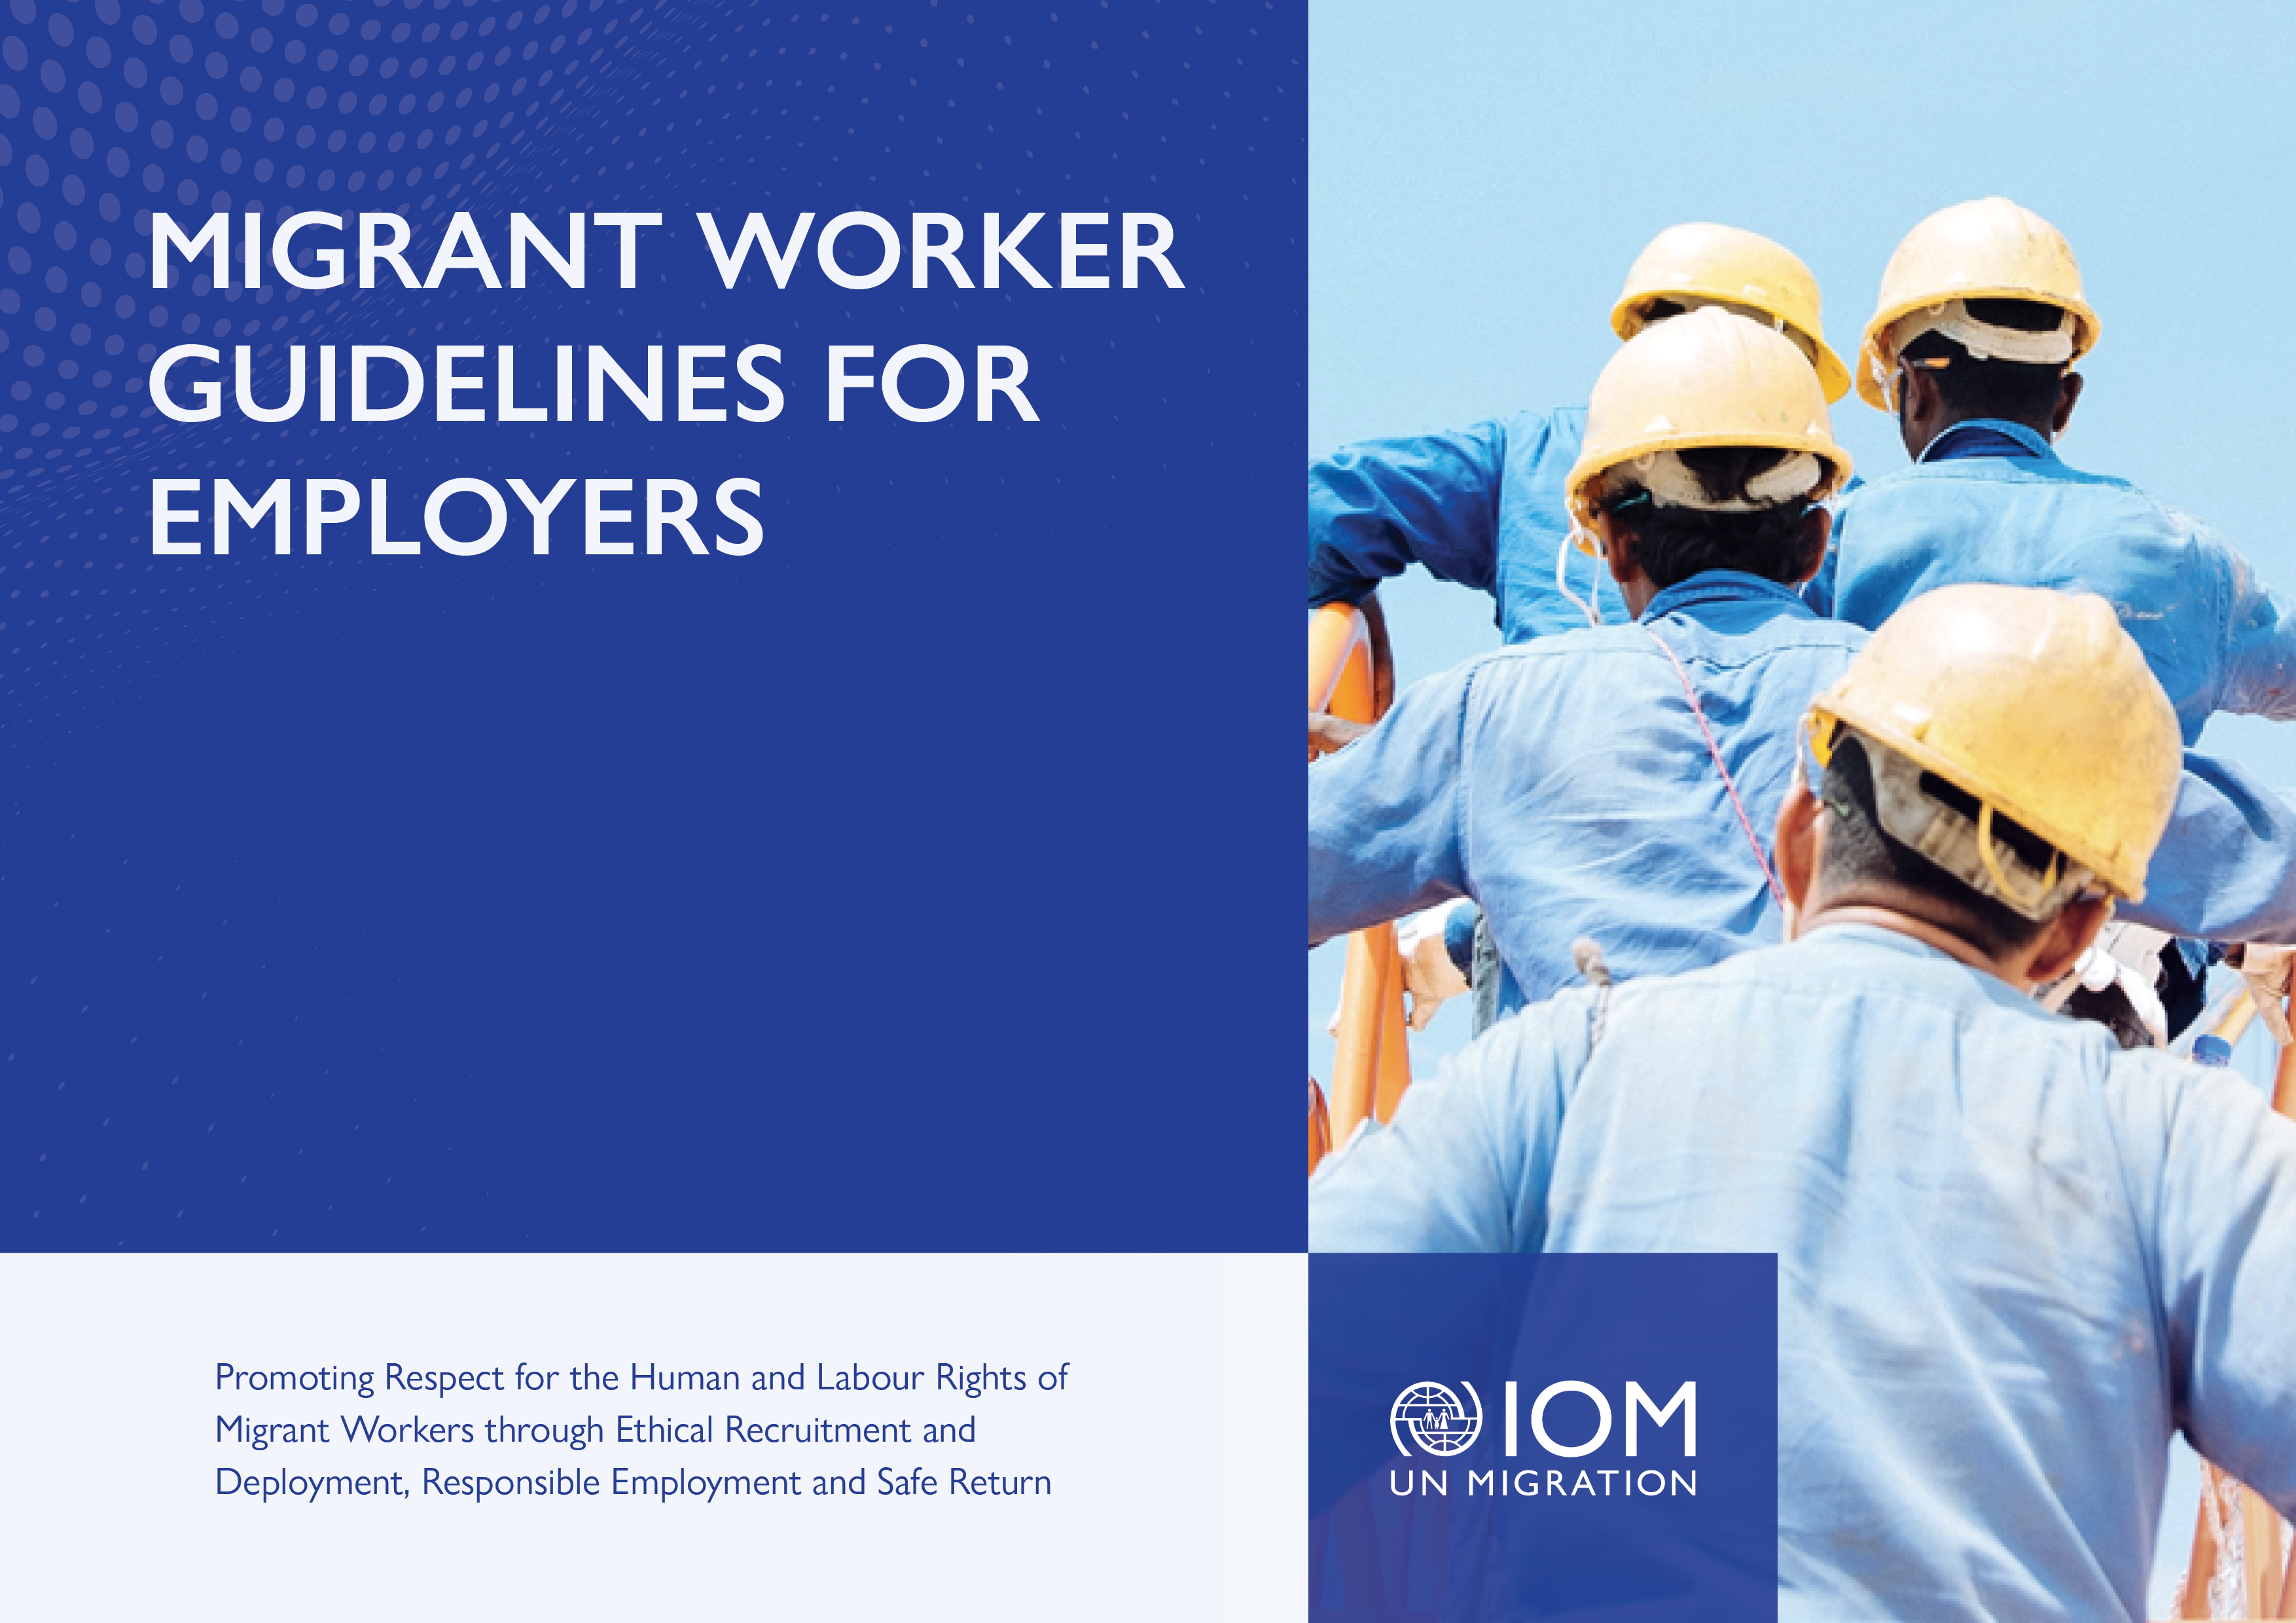 Migrant Worker Guidelines for Employers